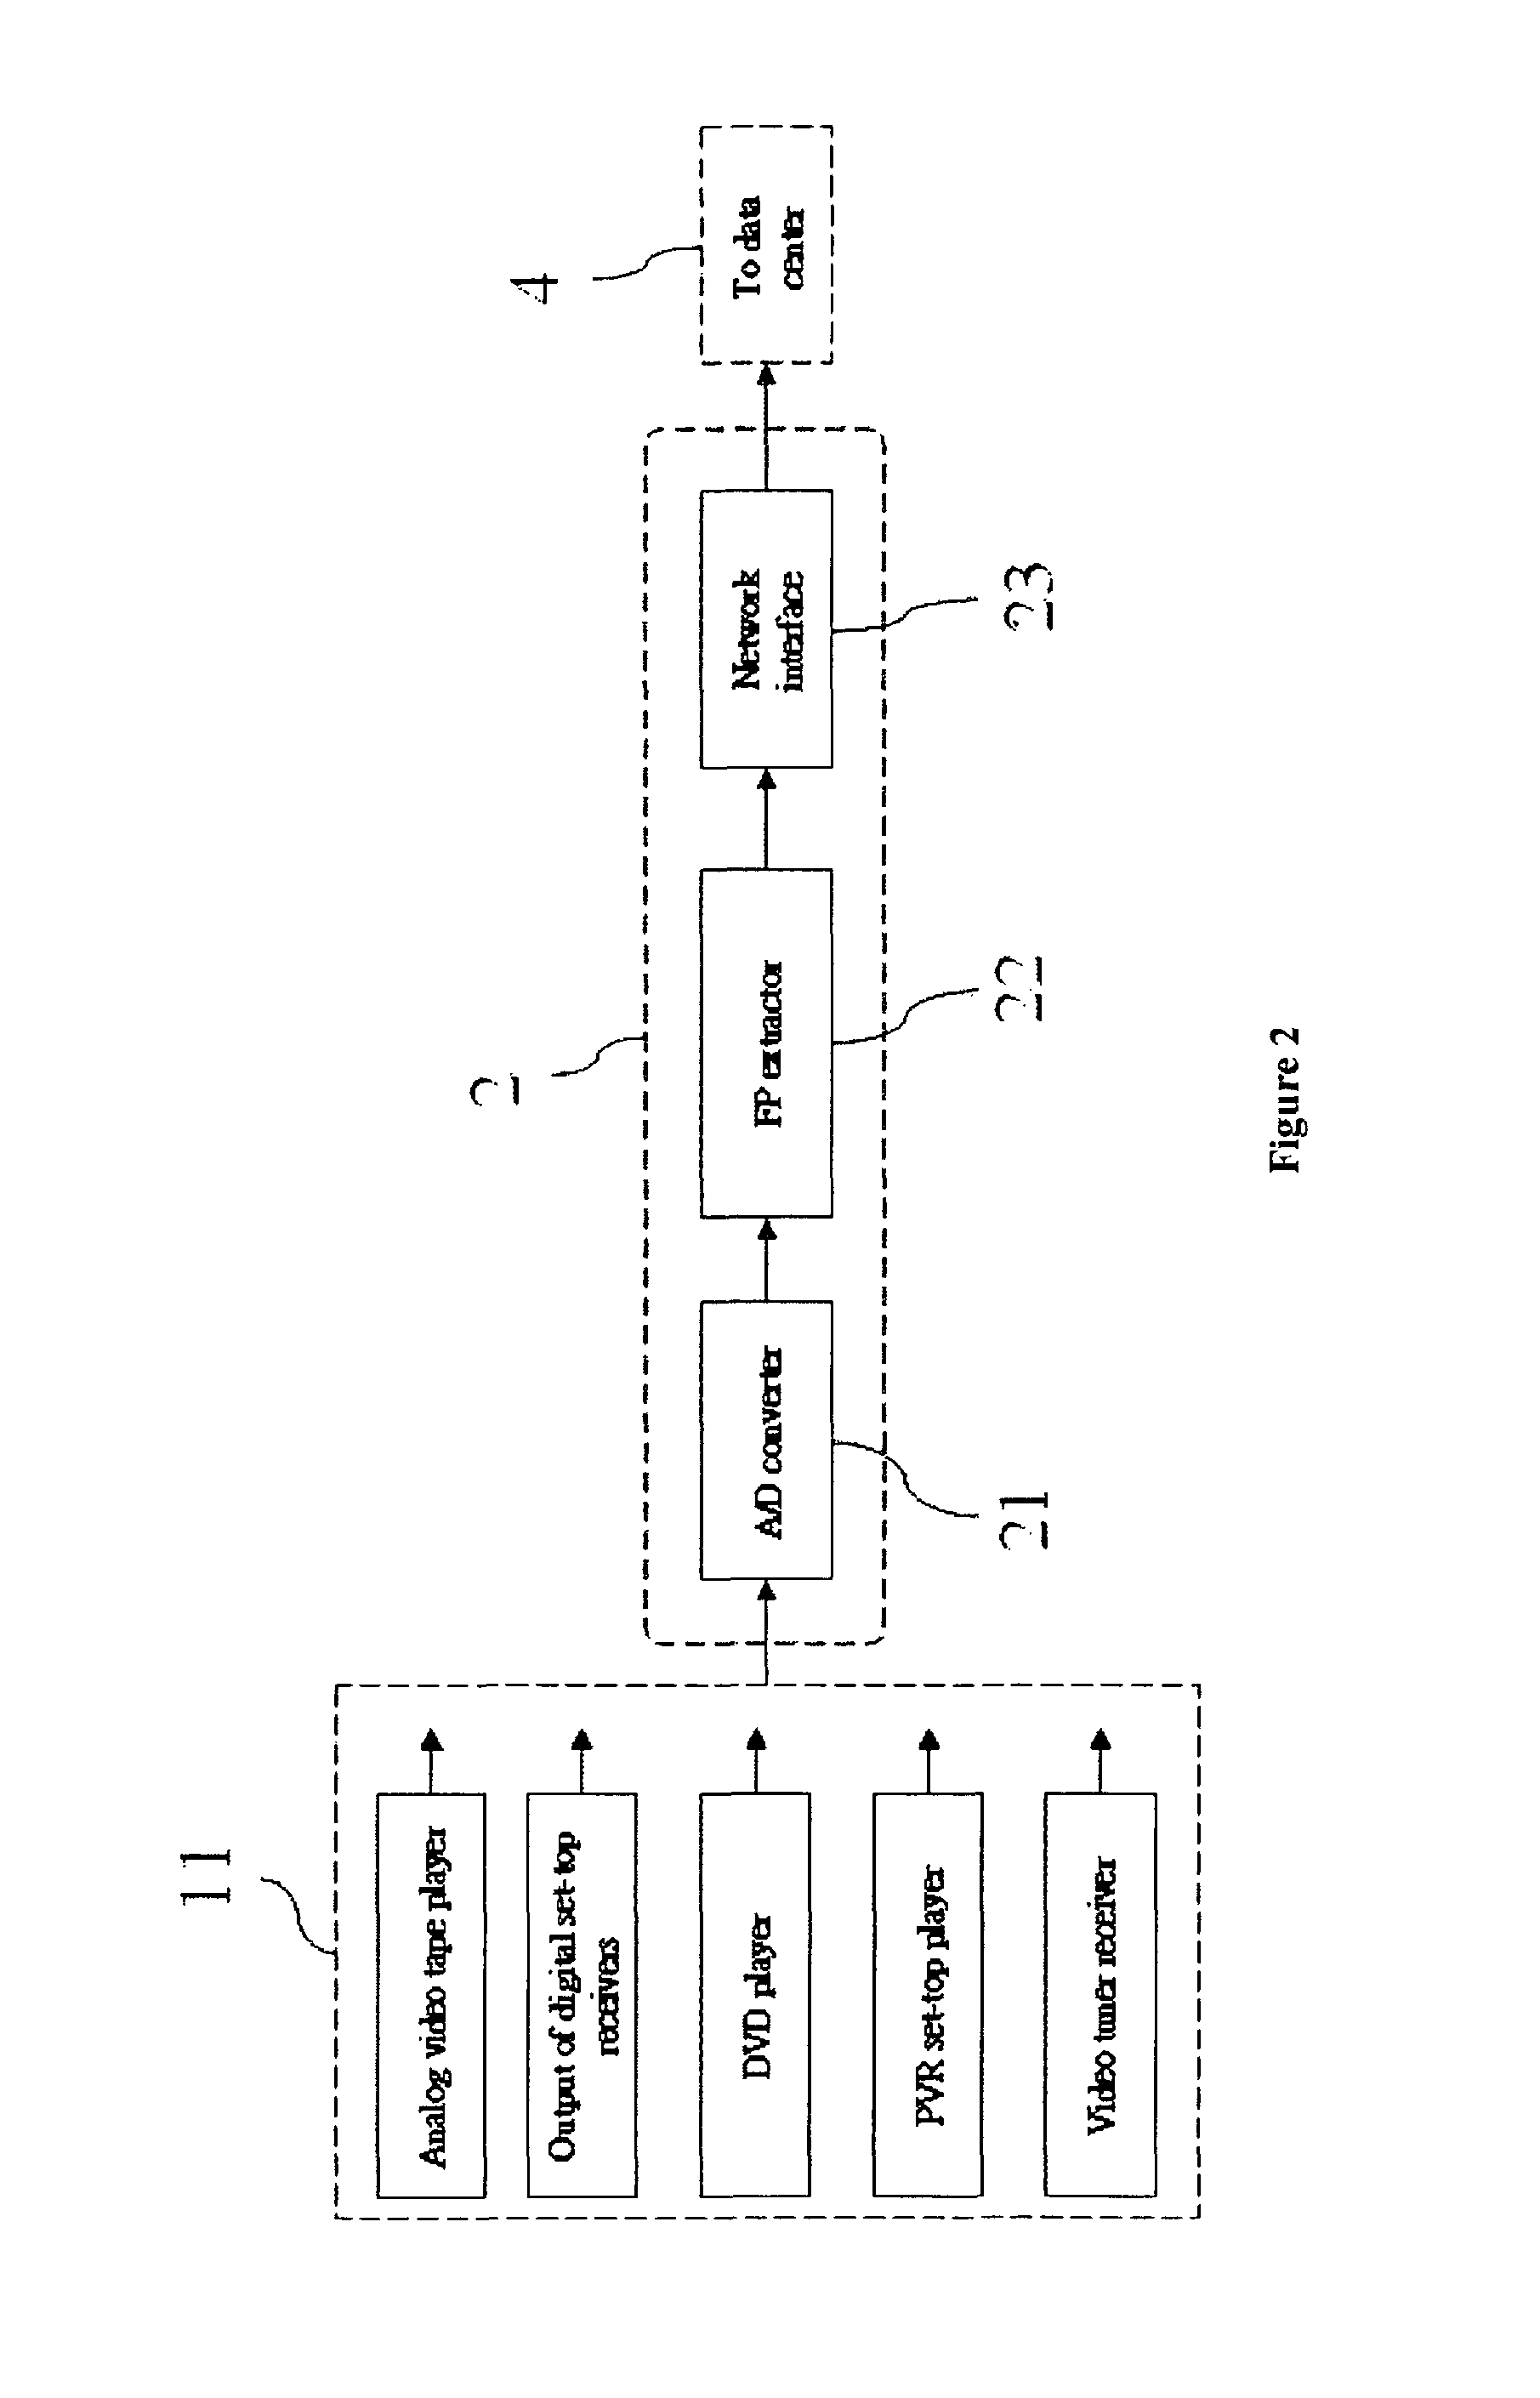 System for facilitating the search of video content